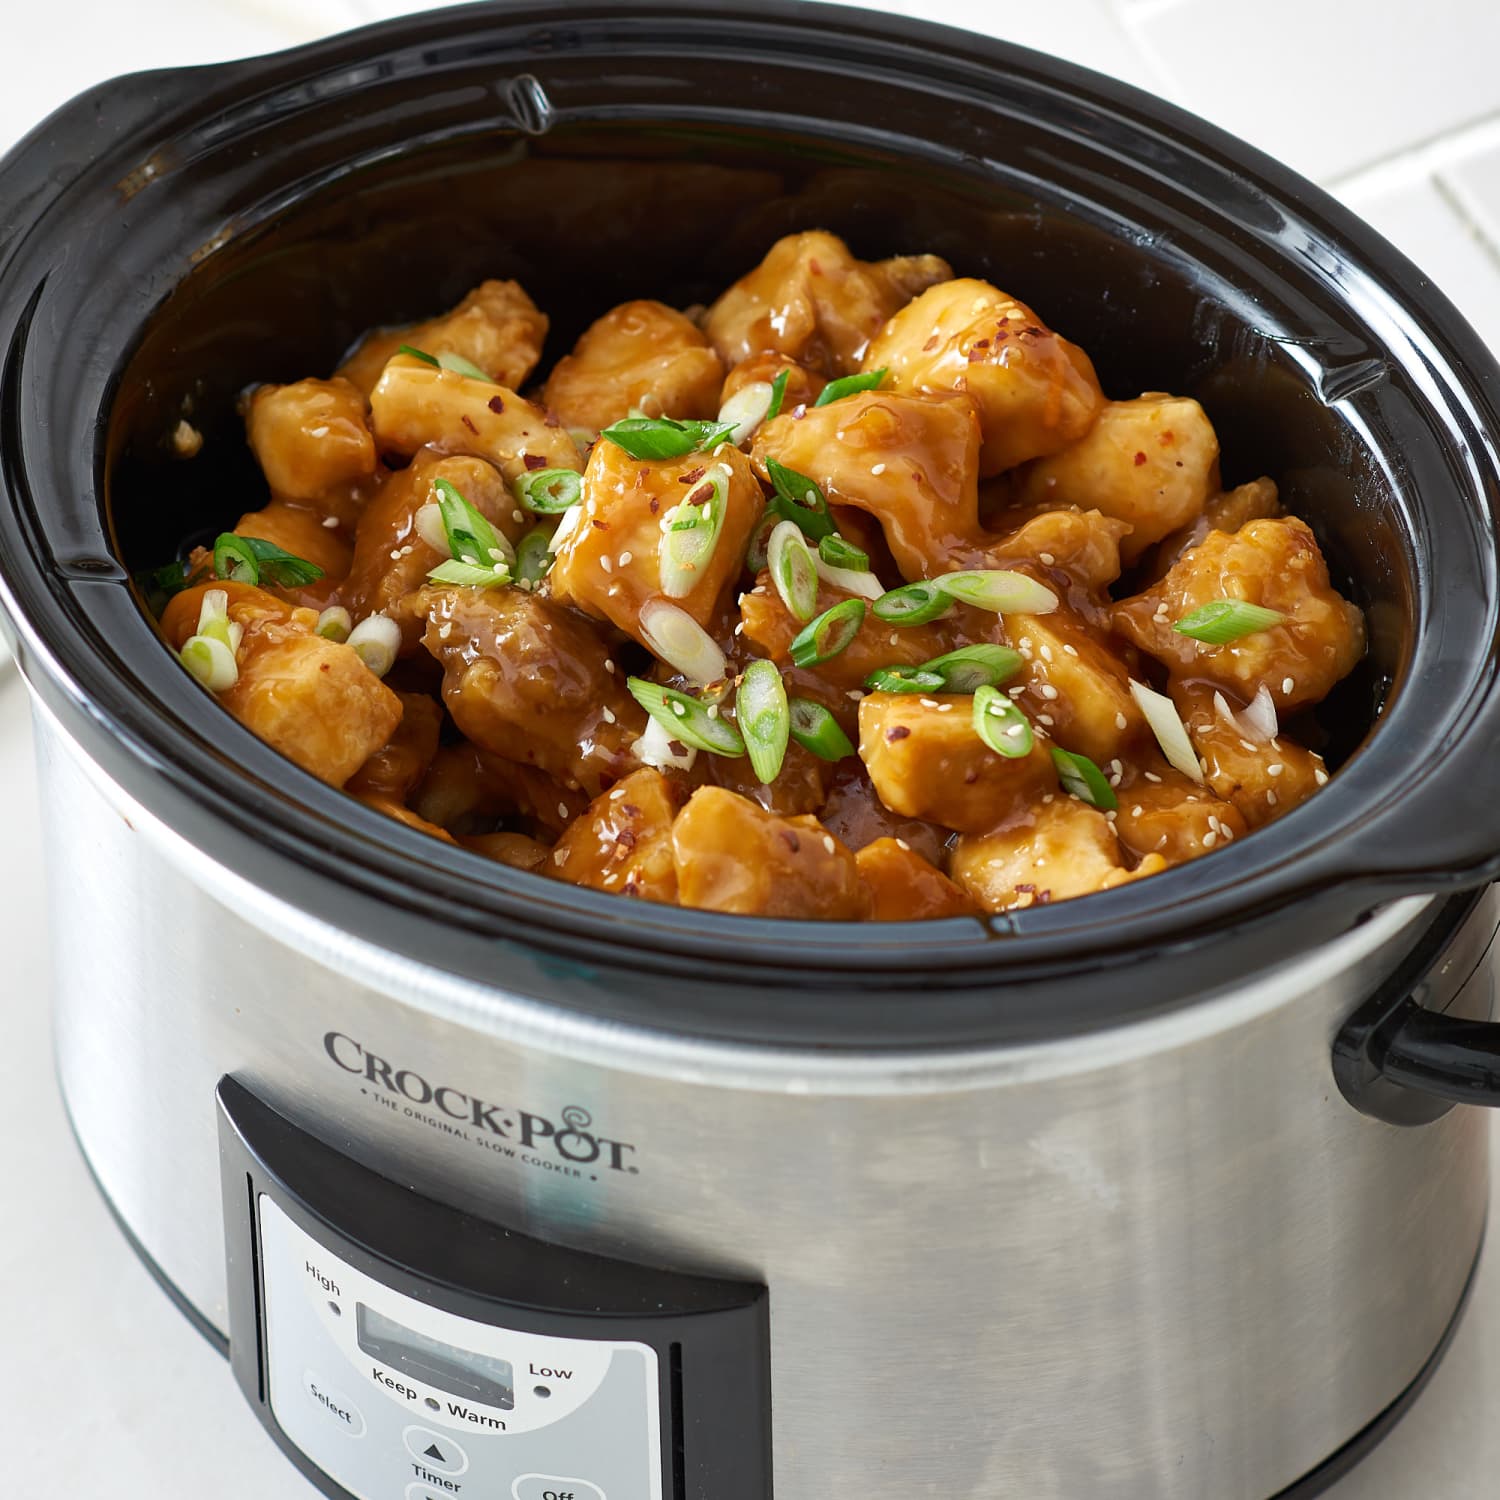 Why You Need This Extra Large Slow Cooker in Your Kitchen - Food